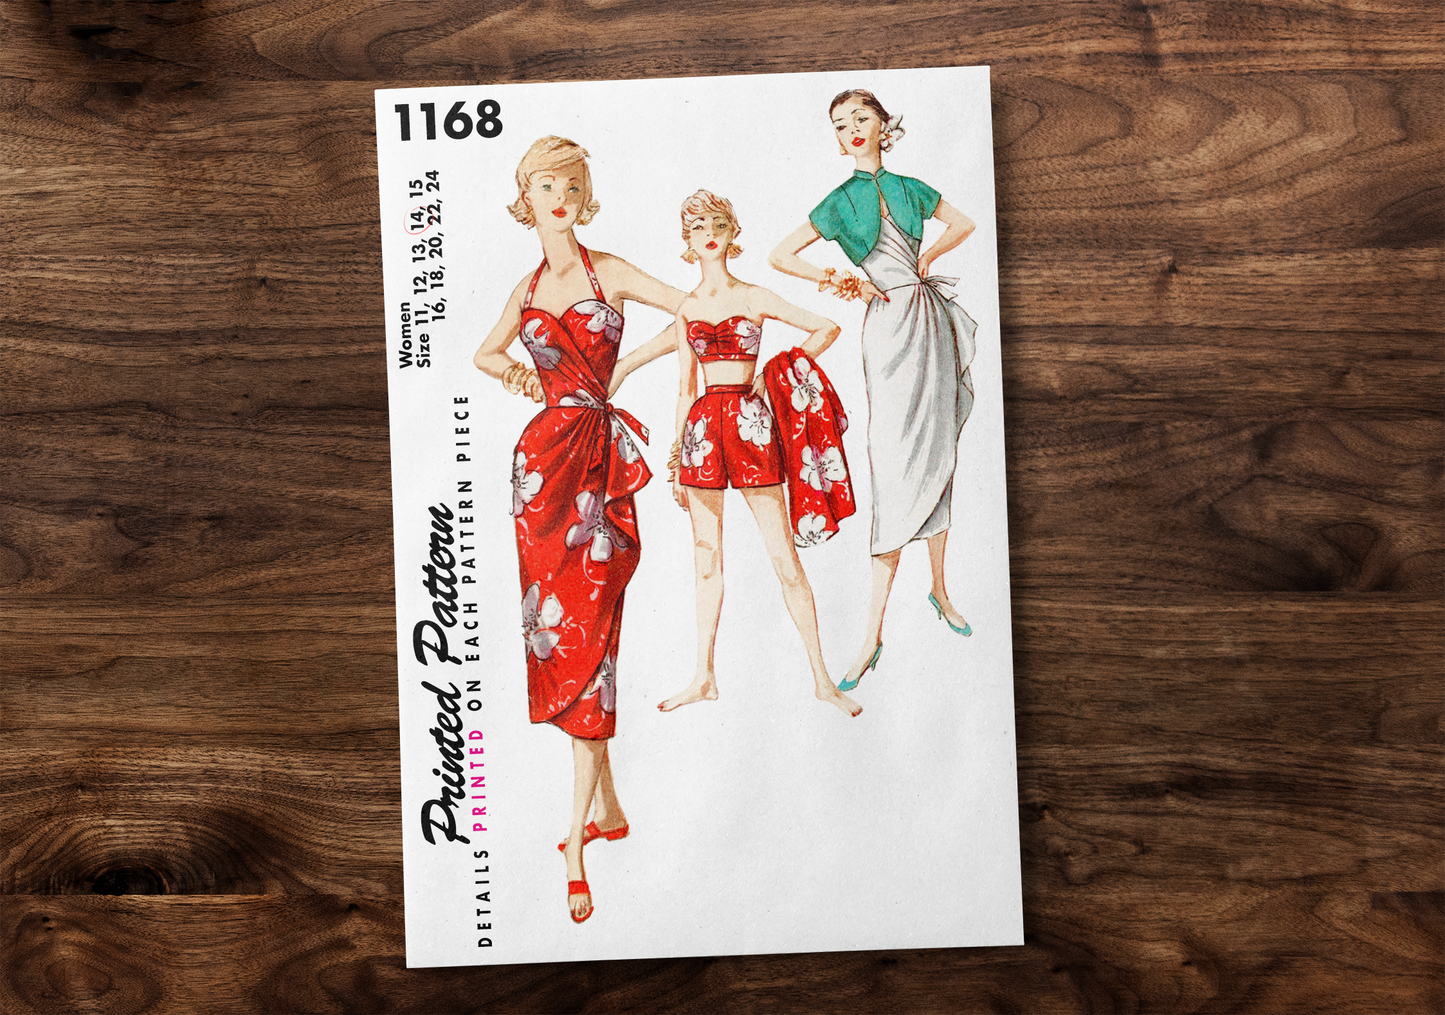 1168SP - Sarong Dress, Bra & Shorts - Vintage Sewing Pattern - 1950s - *REPRODUCTION* - Available sizes: 11, 12, 13, 14, 15, 16, 18, 20, 22, 24